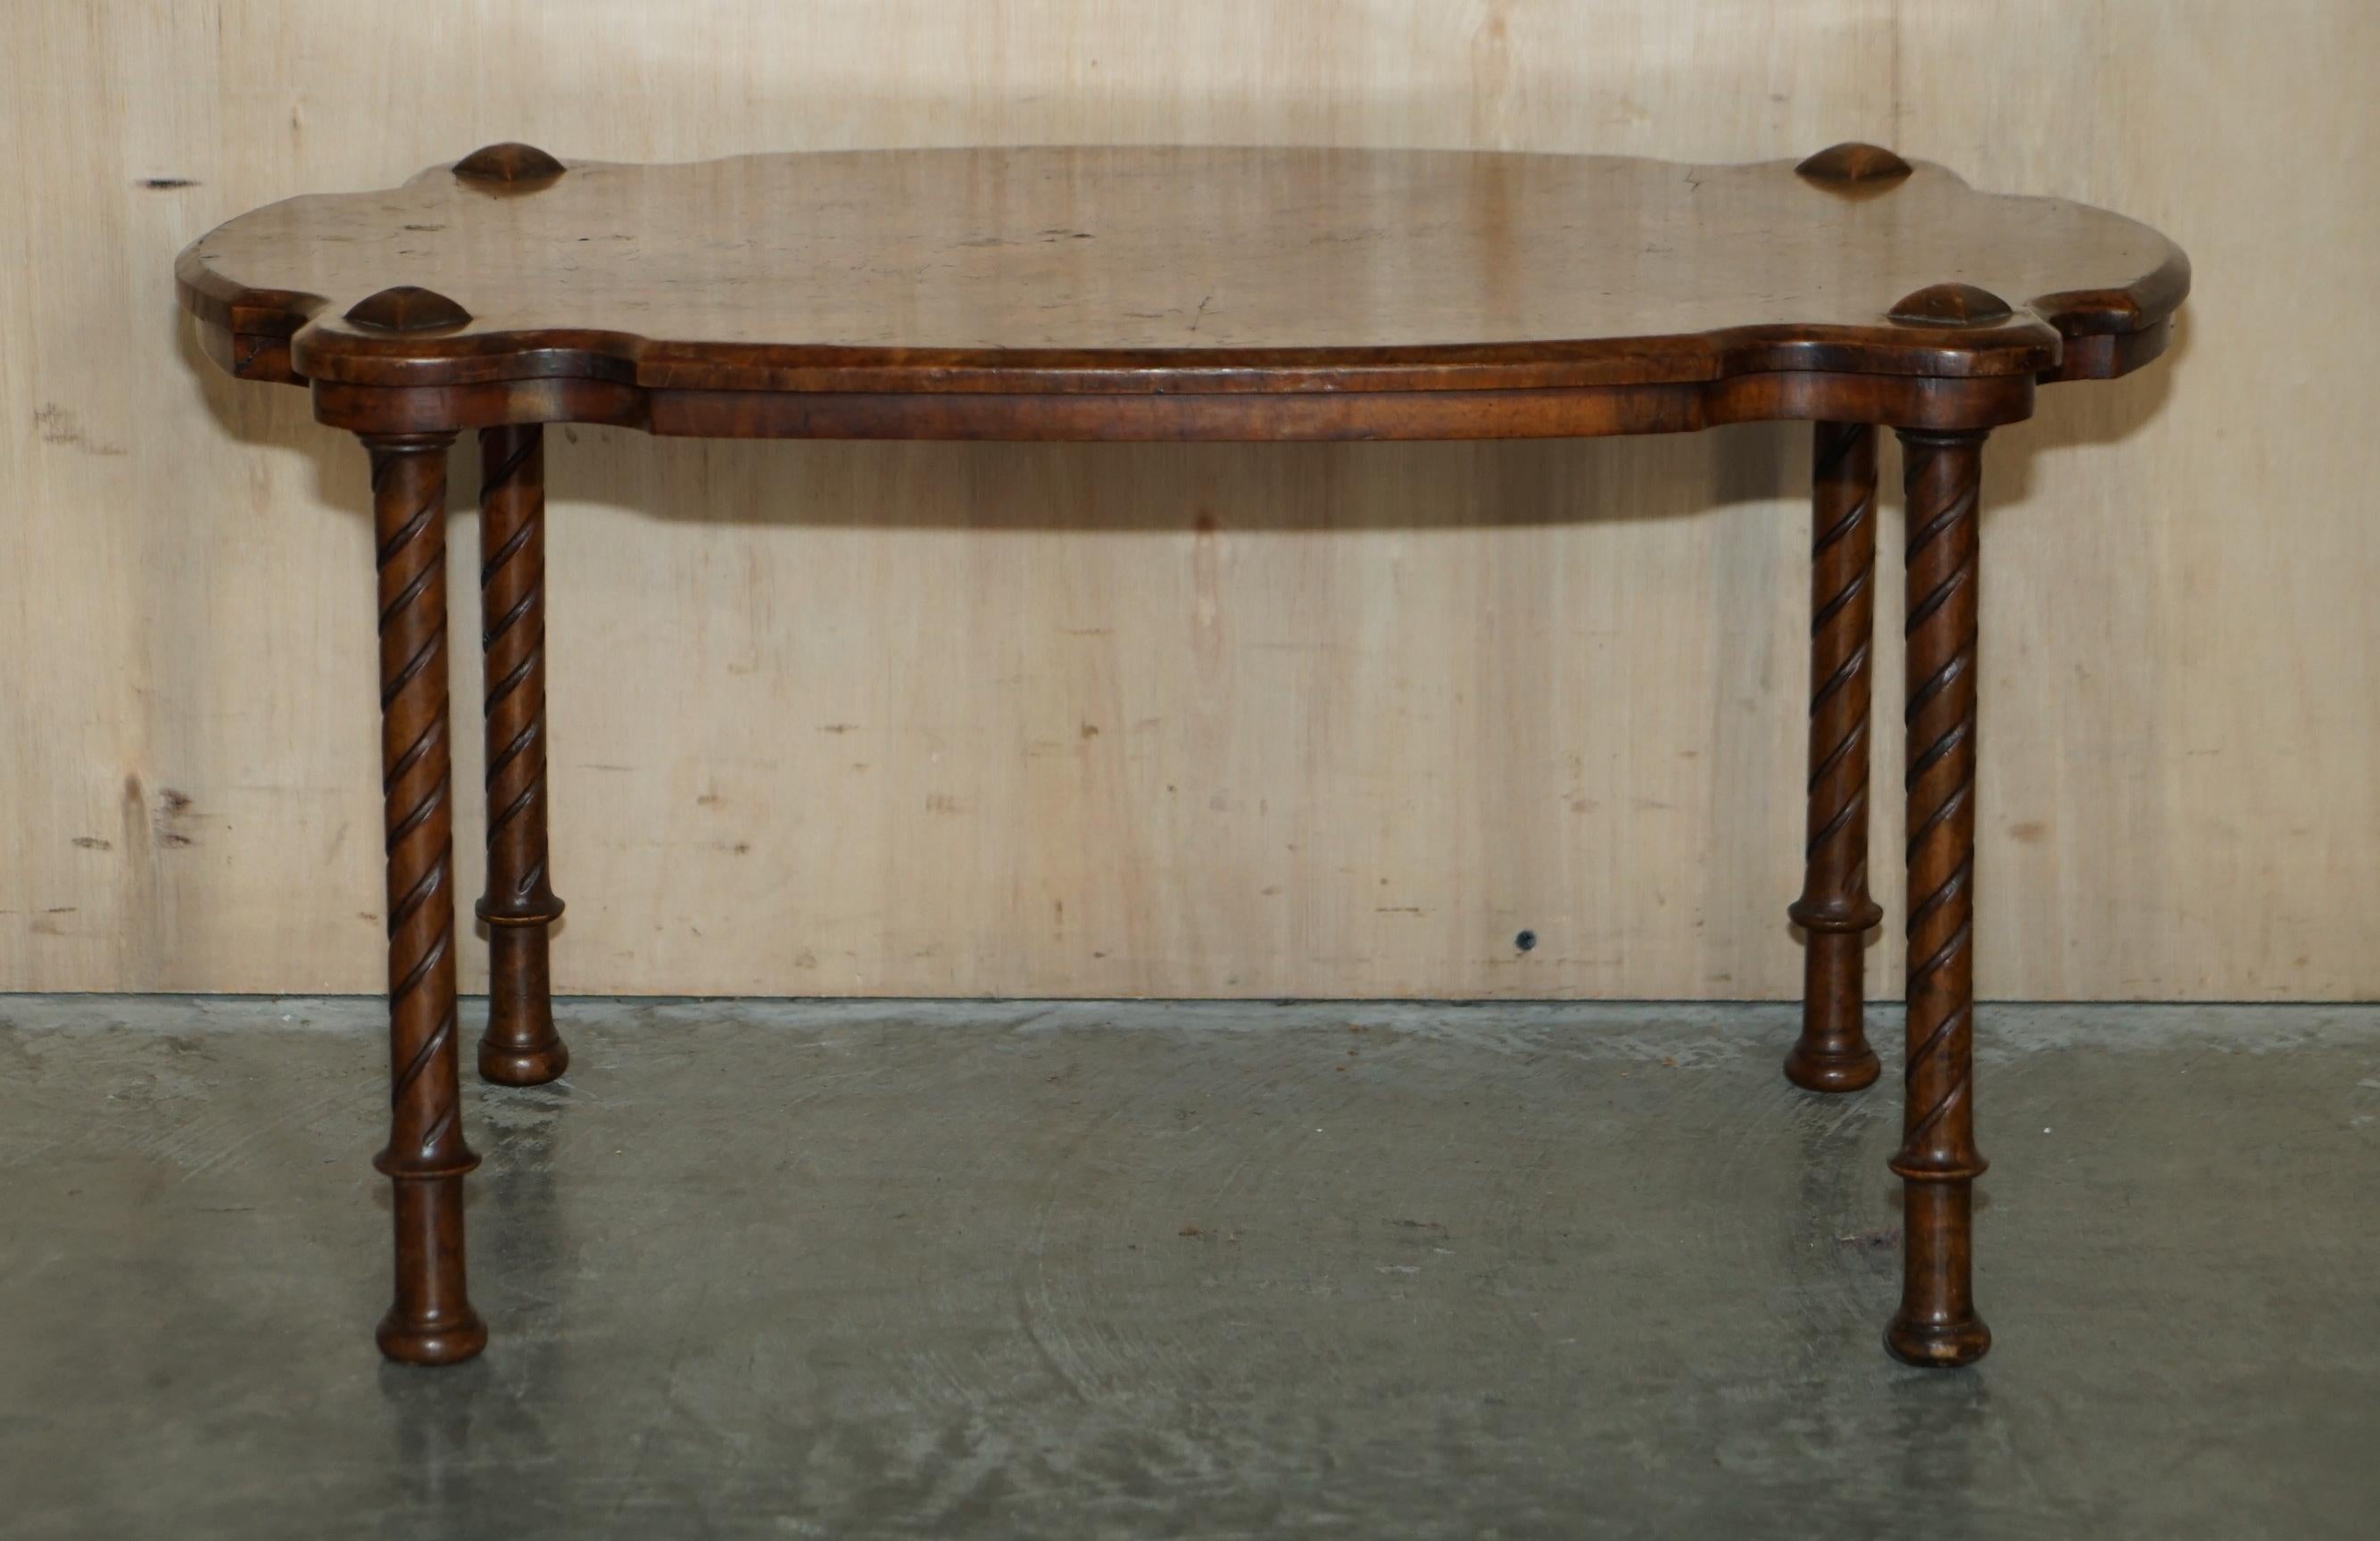 High Victorian Exquisitely Hand Carved Burr Walnut Coffee Cocktail Table Lovely Turned Legs For Sale